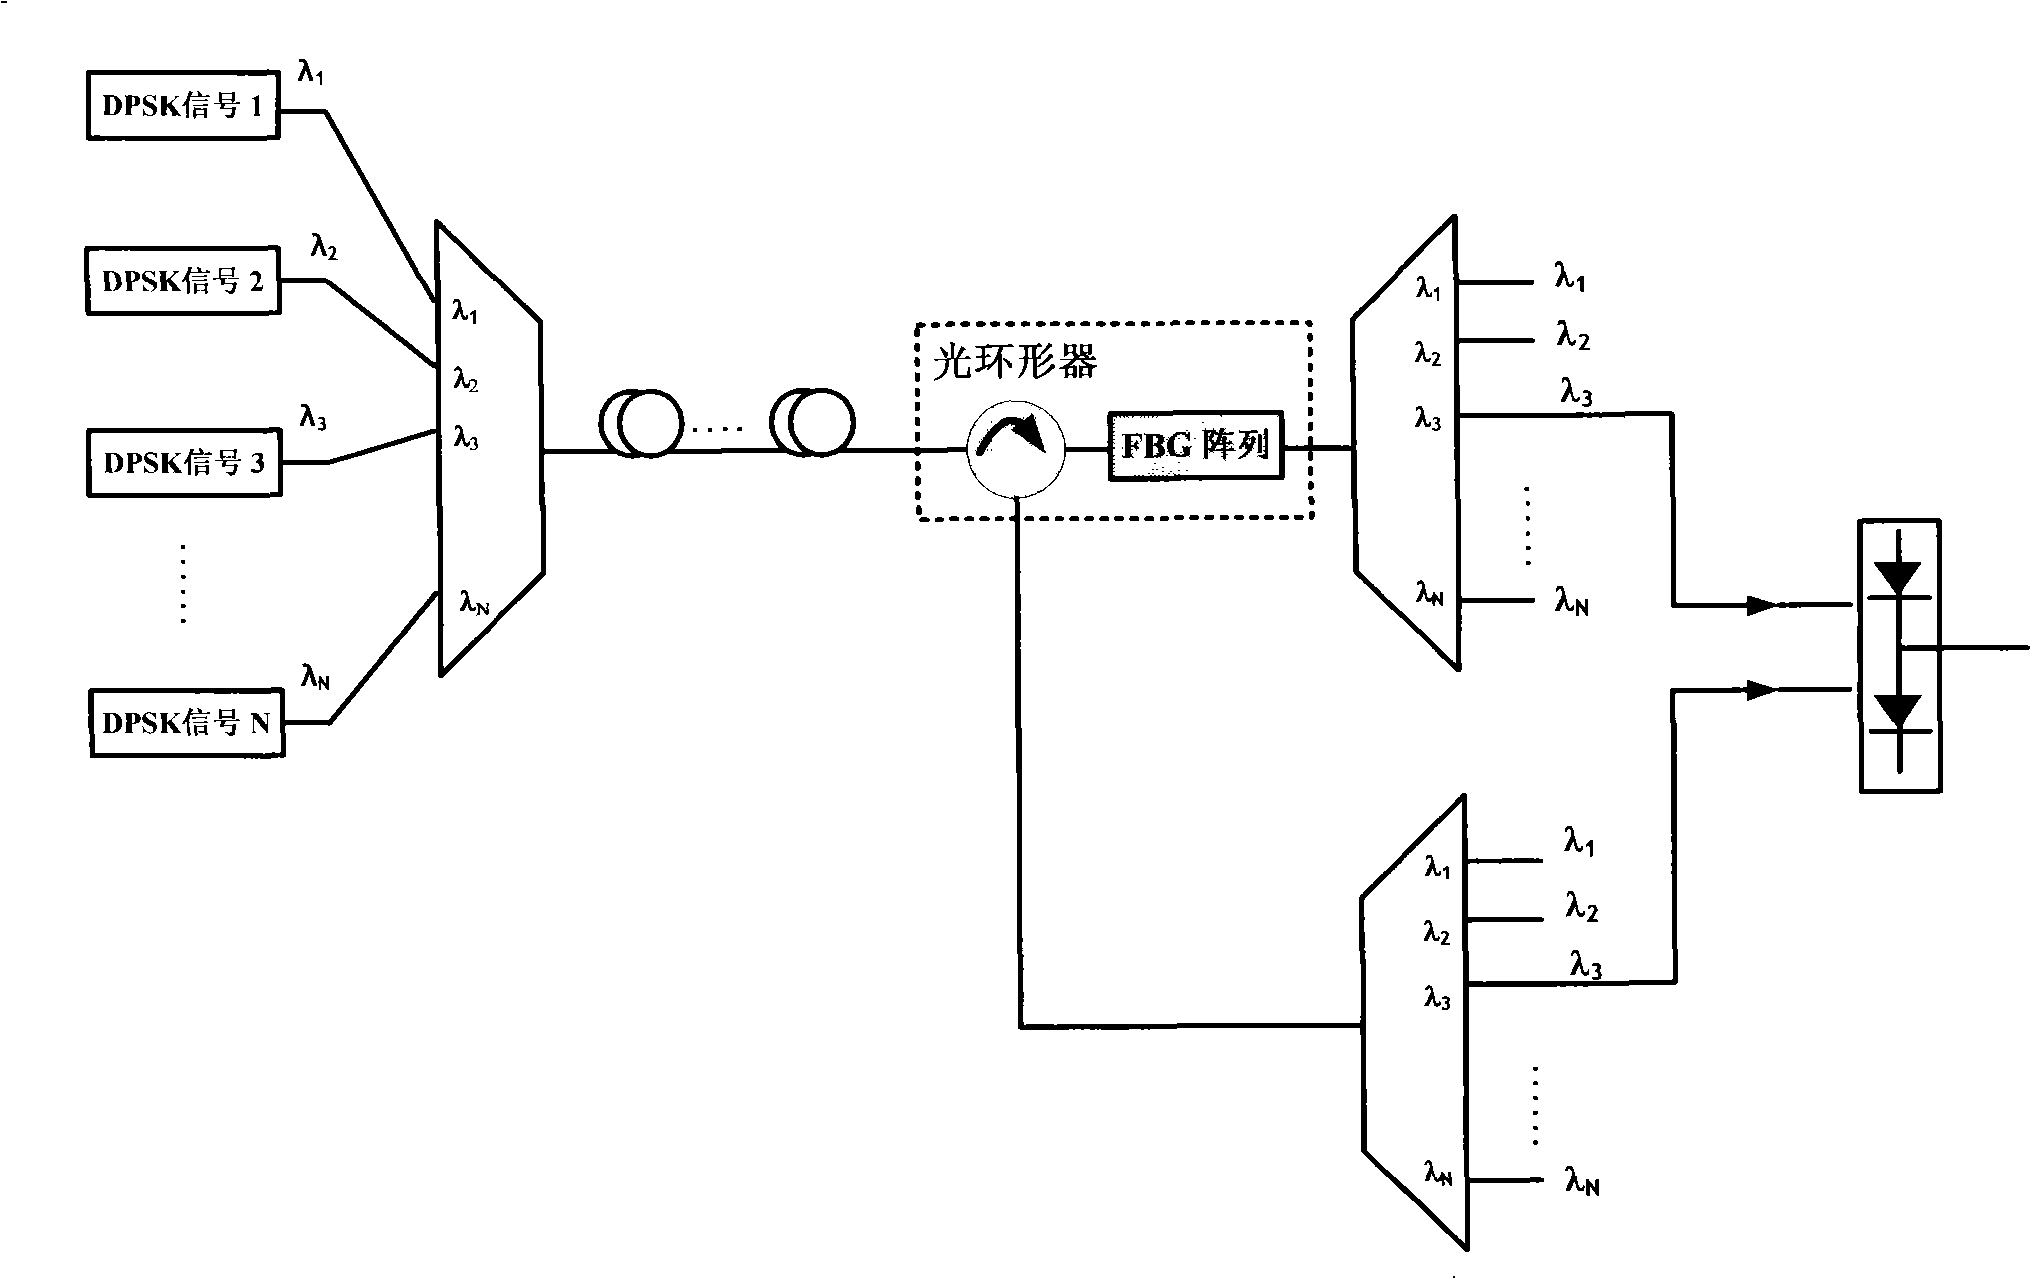 Transmission control method of wavelength division multiplexing system